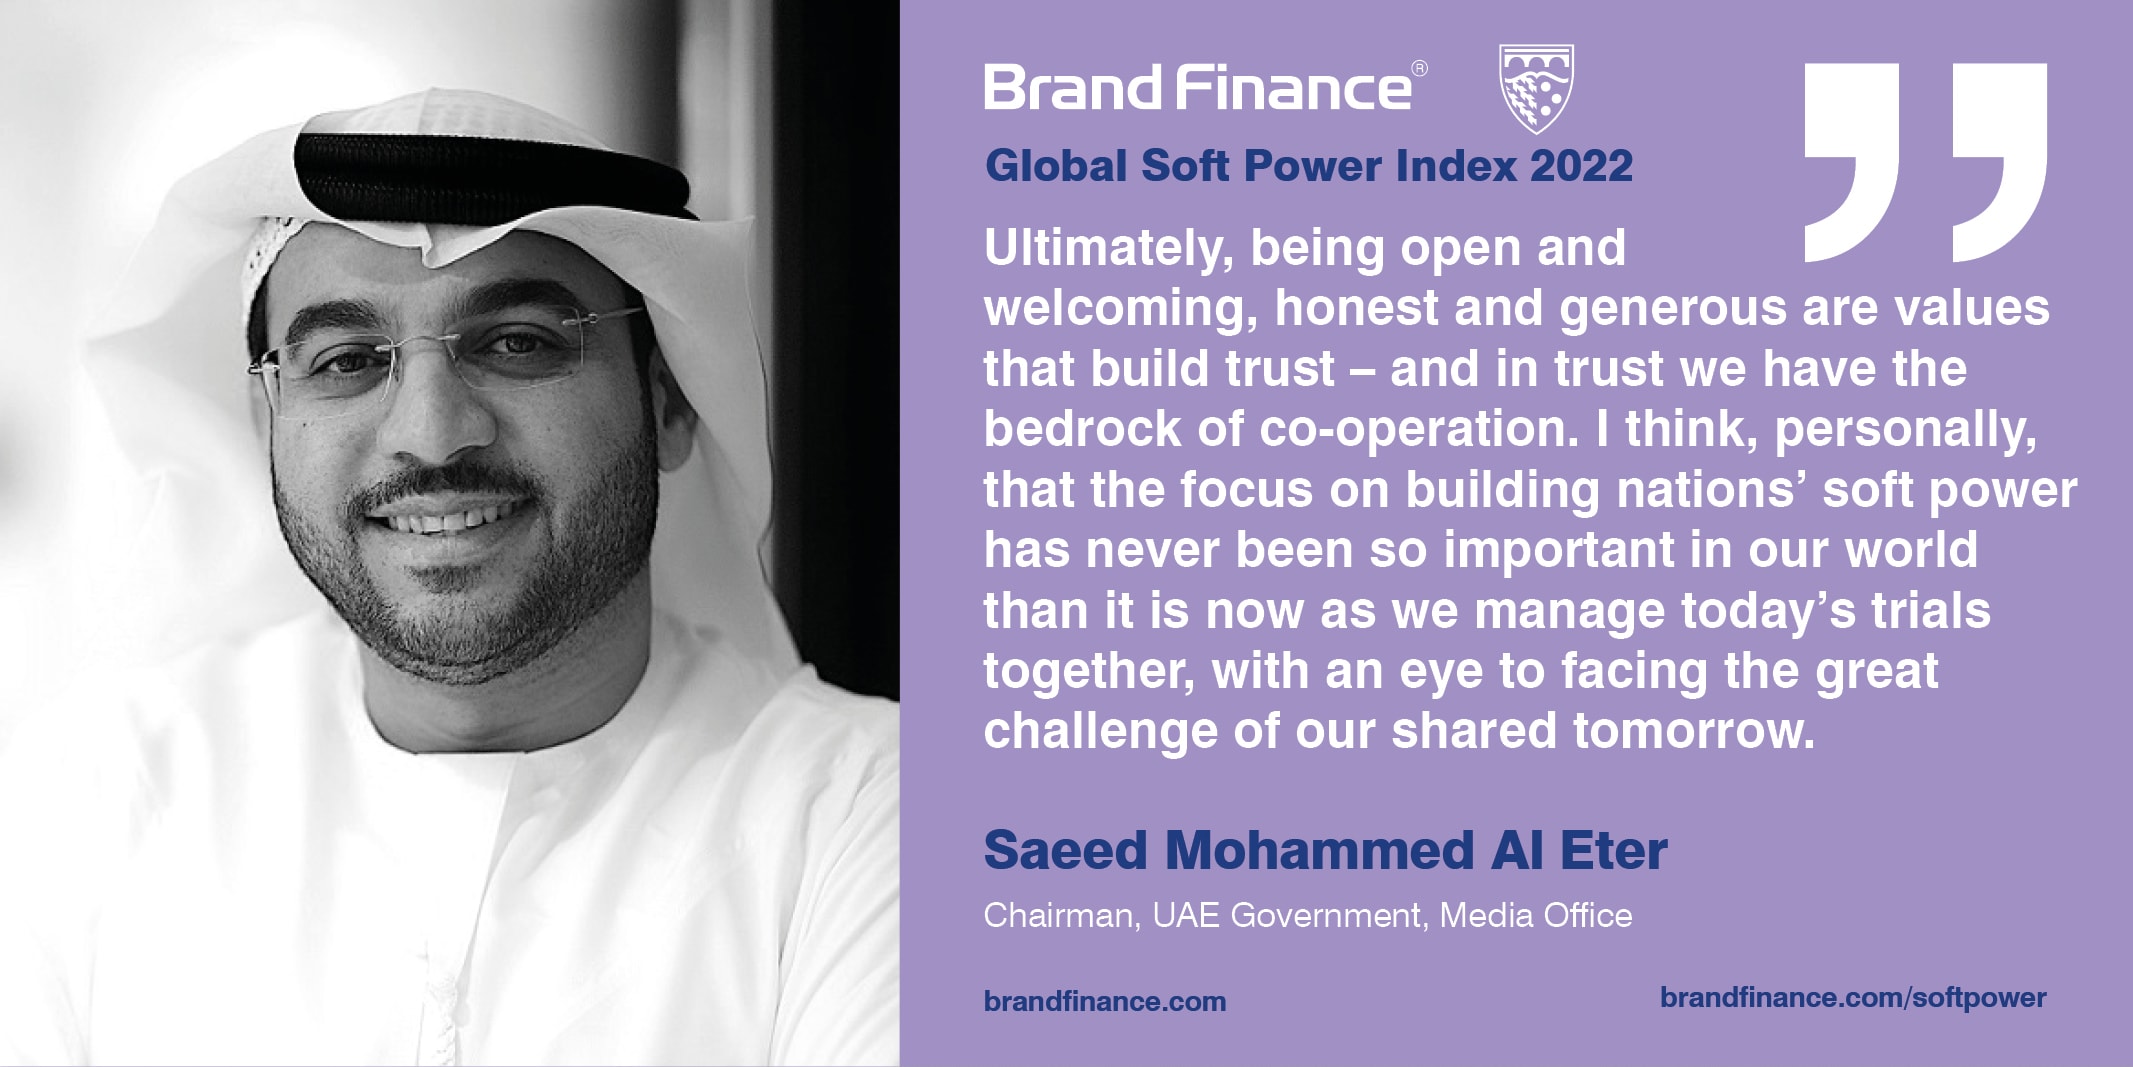 Saeed Mohammed Al Eter, Chairman, UAE Government, Media Office